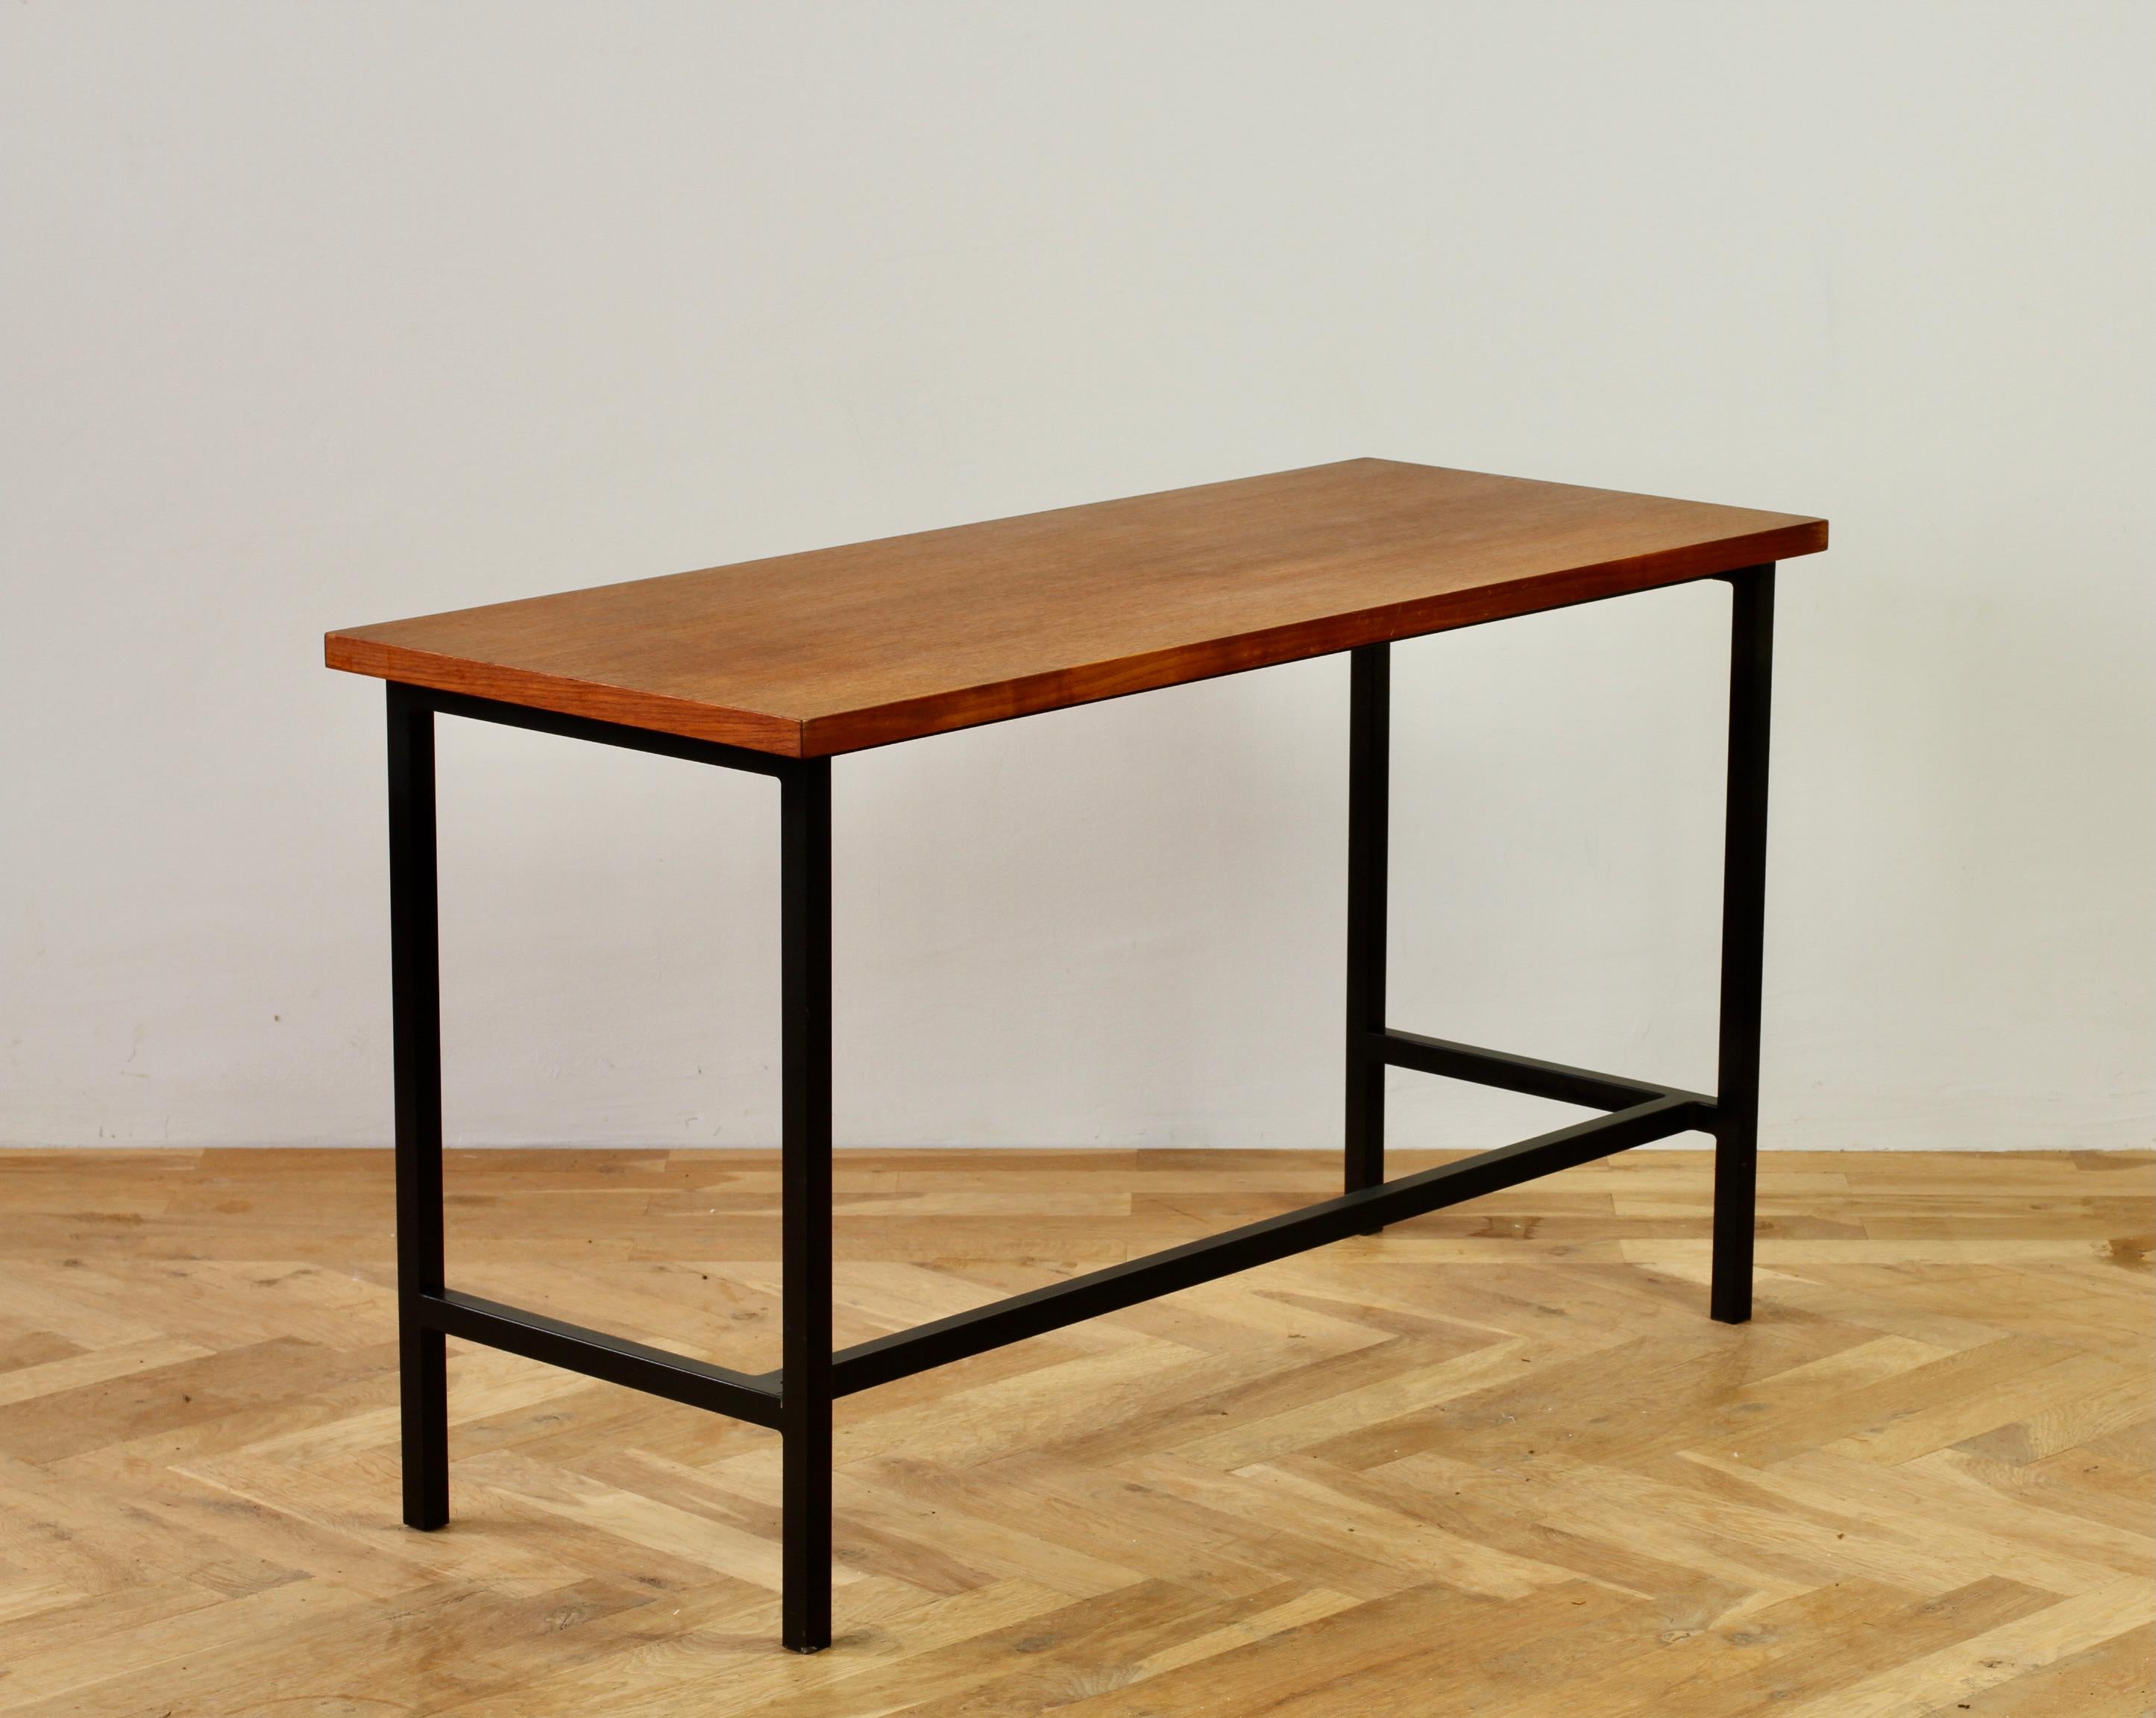 Metal Florence Knoll 1950s Mid-Century Wood Veneer Black Frame Desk or Console Table For Sale